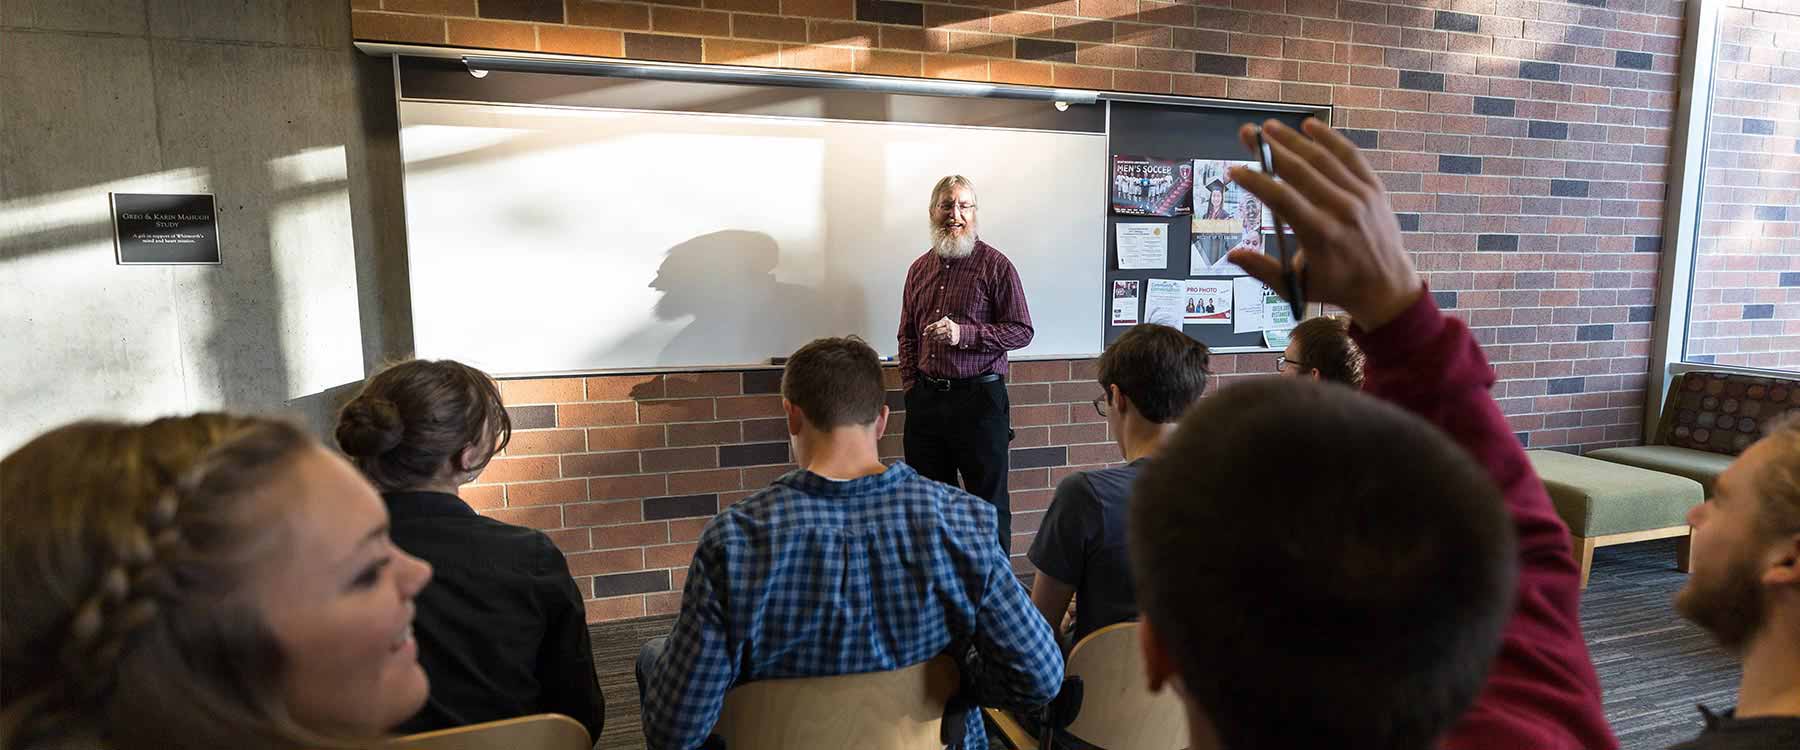 A professor stands in front of a whiteboard in a classroom, engaging with students, one of whom is raising their hand.